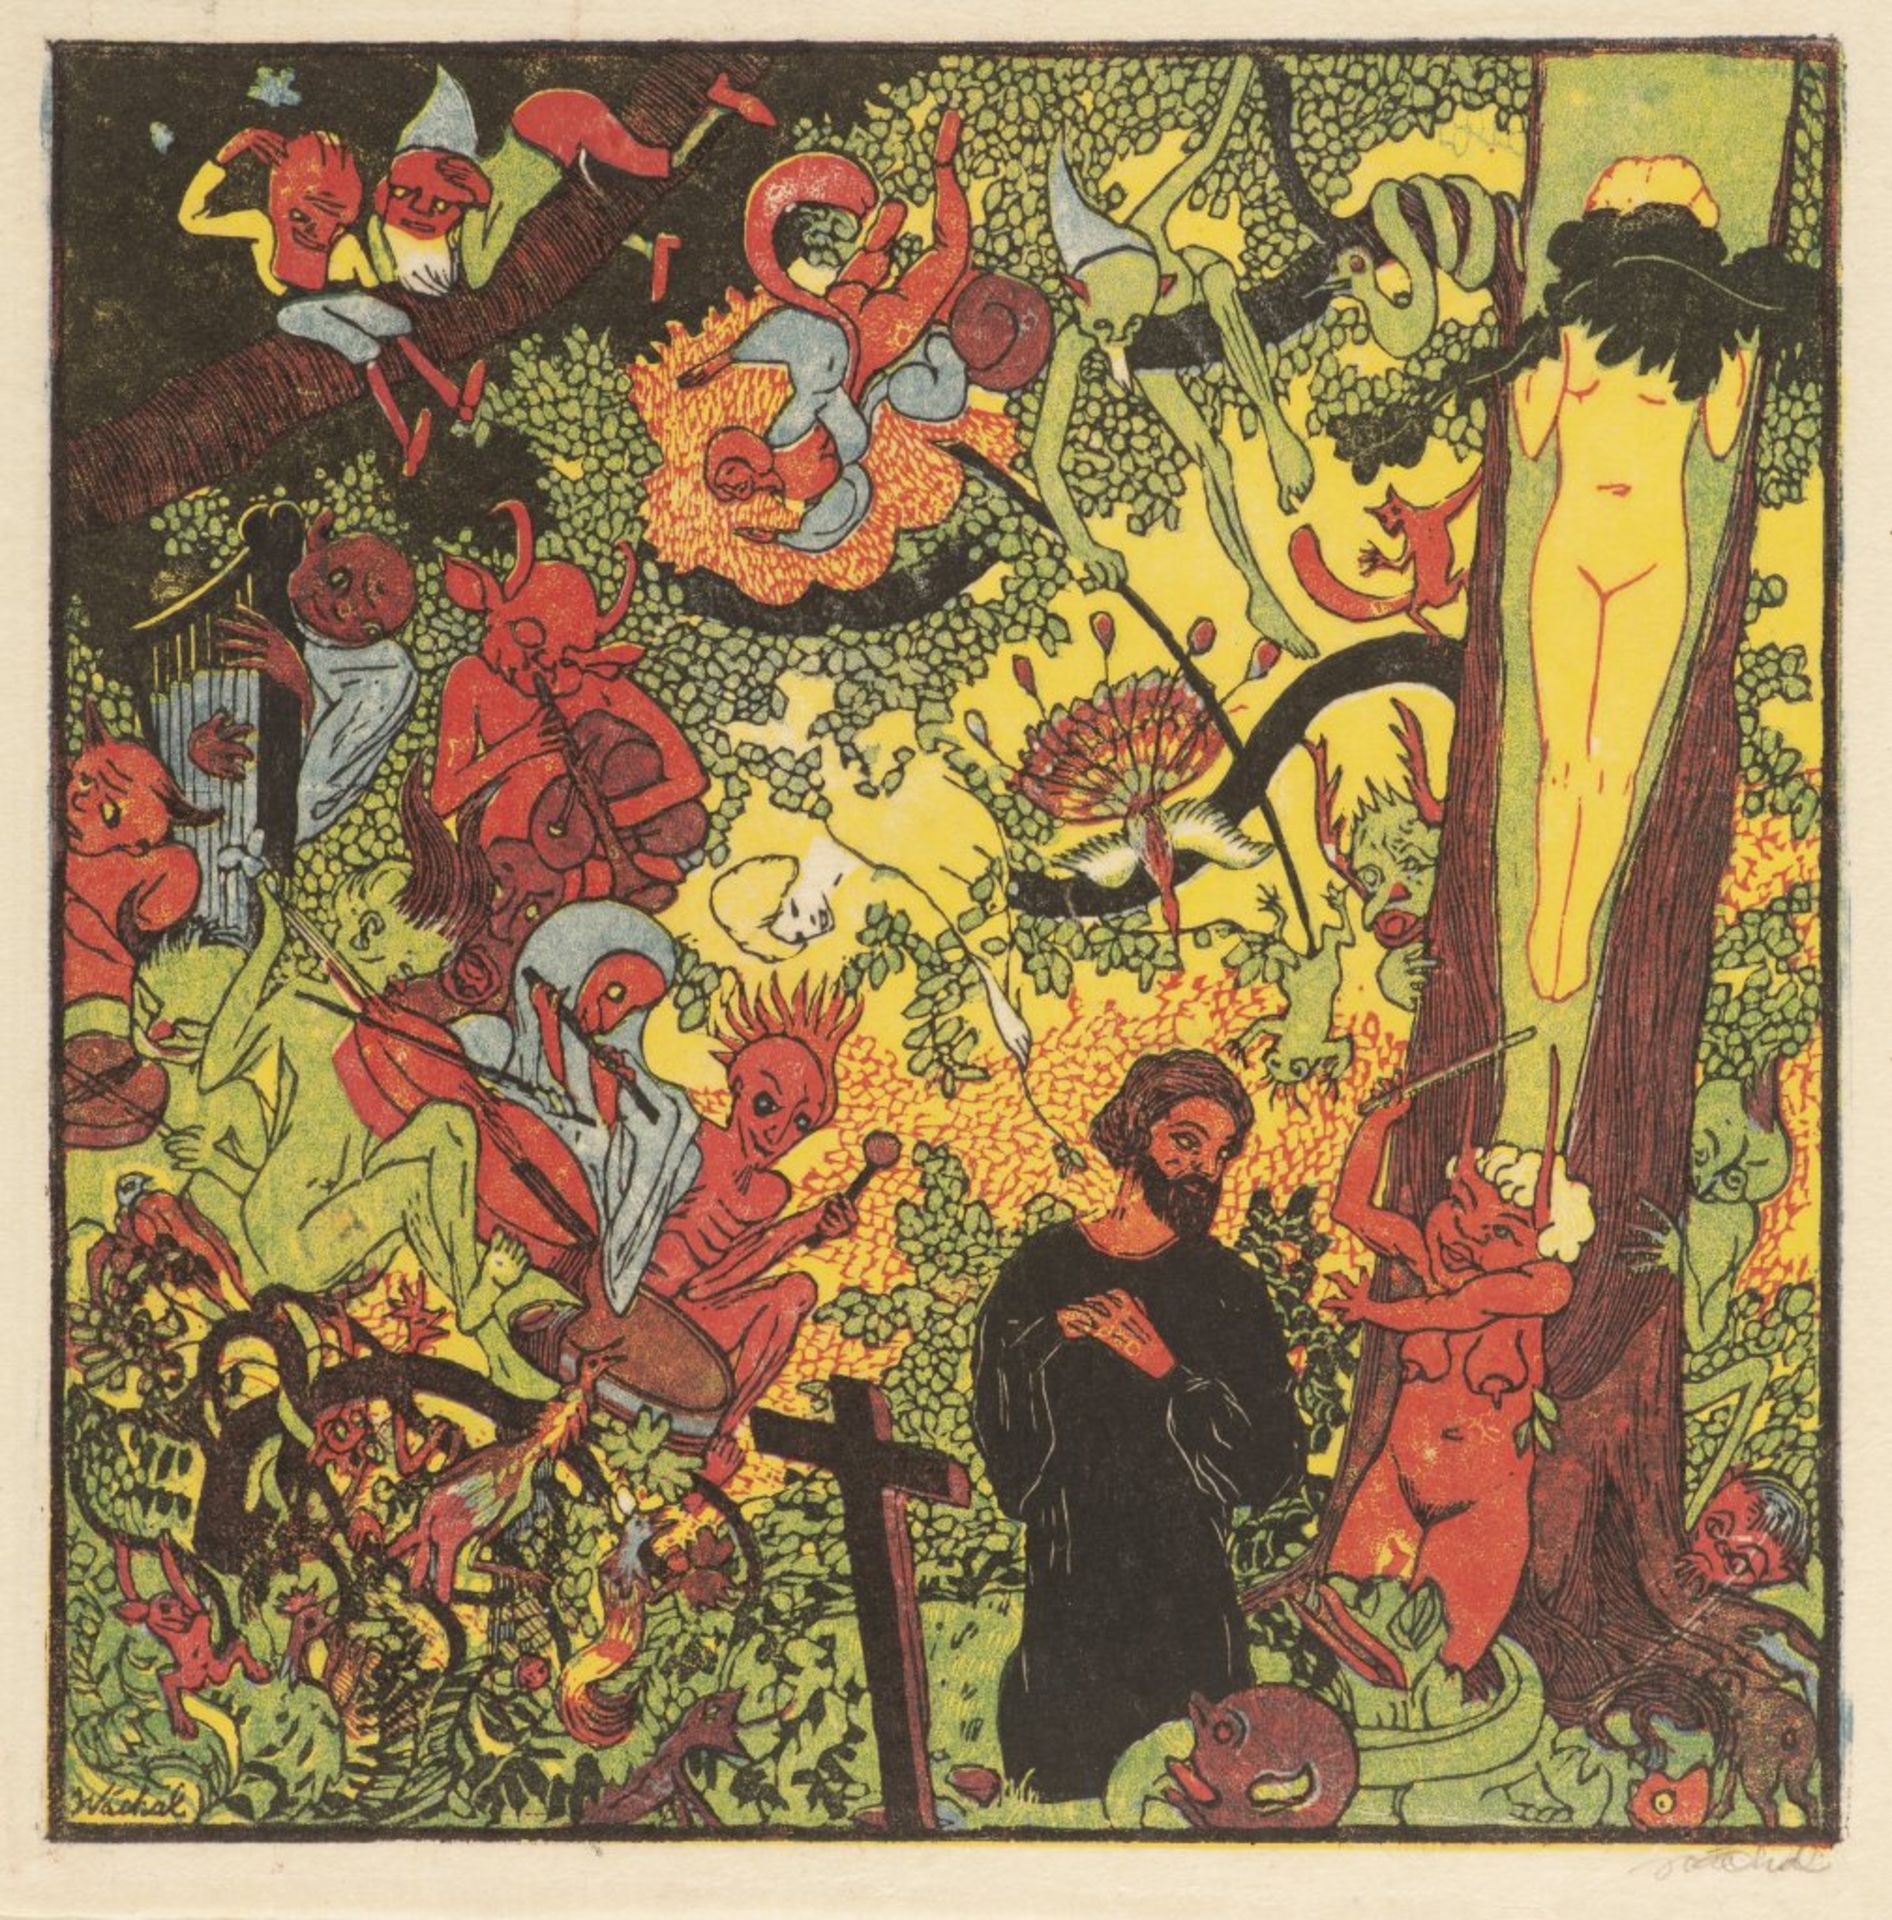 JOSEF VÁCHAL 1884 - 1969: THE TEMPTATION OF ST. ANTHONY 1912 Colored woodcut on paper In frame: 22 x